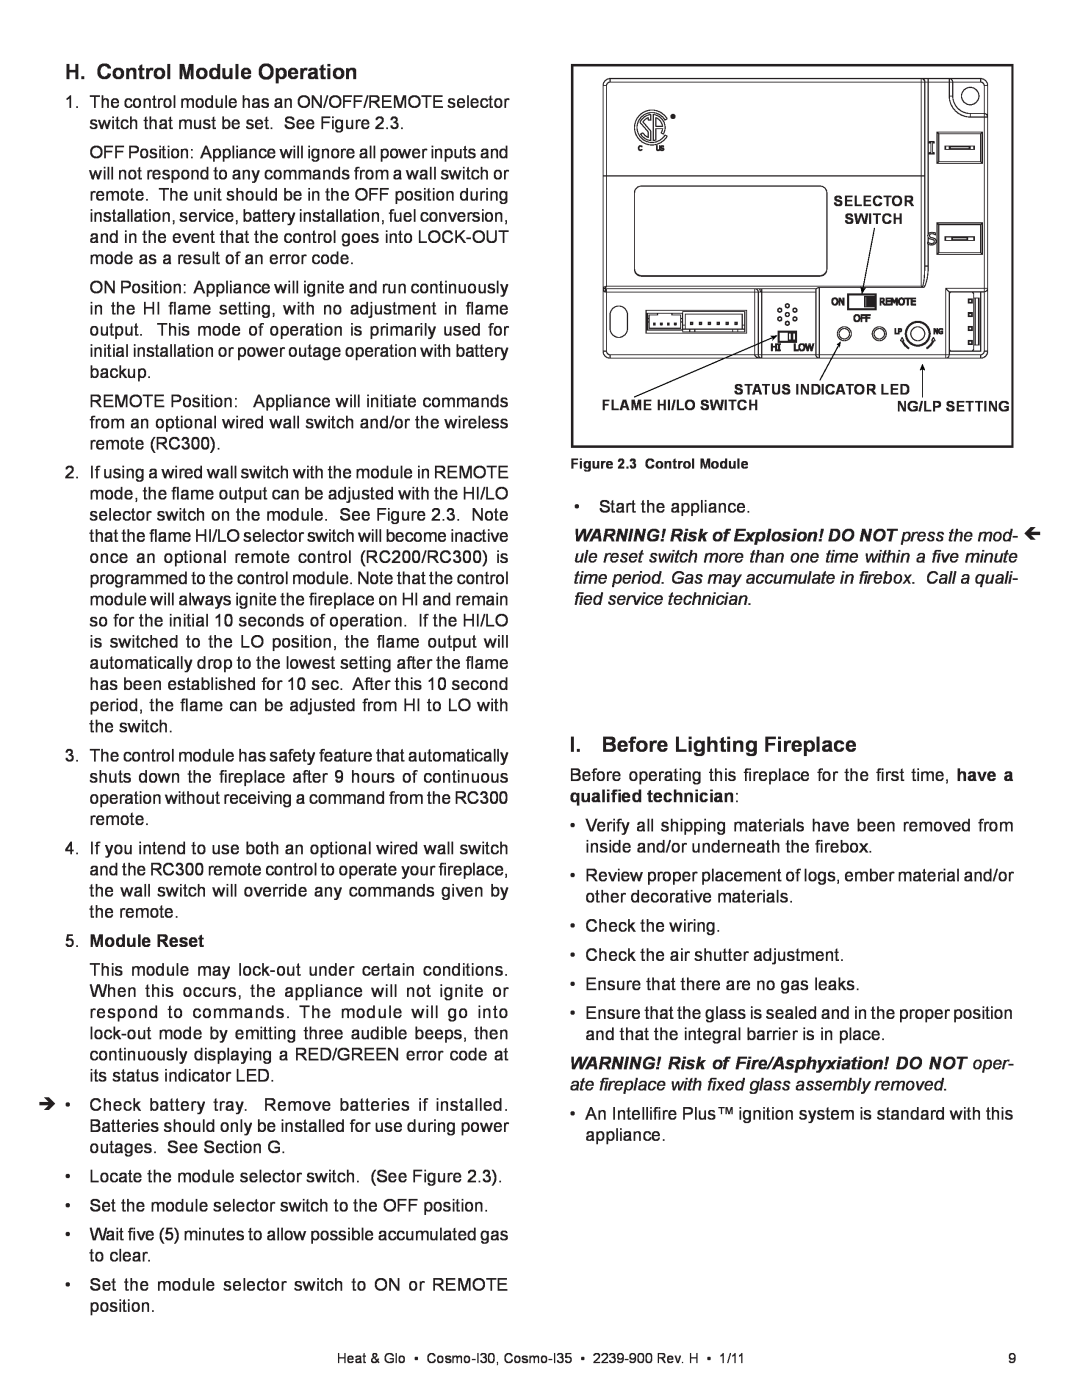 Heat & Glo LifeStyle Cosmo-130 owner manual H. Control Module Operation, I. Before Lighting Fireplace, Module Reset 